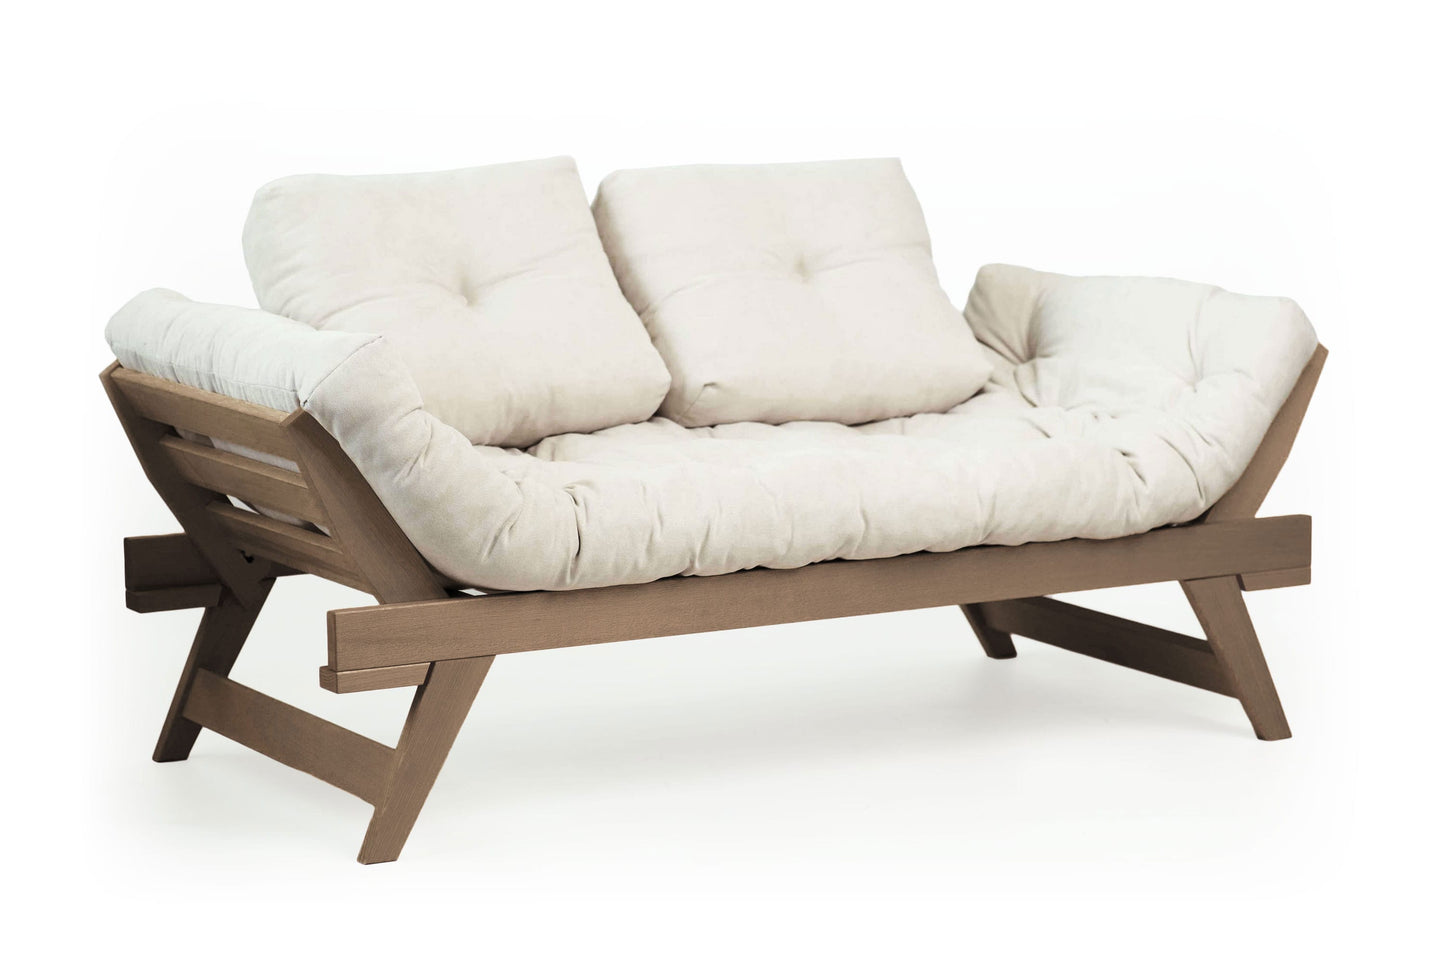 Long Beach Natural Chemical-Free Daybed Sleeper